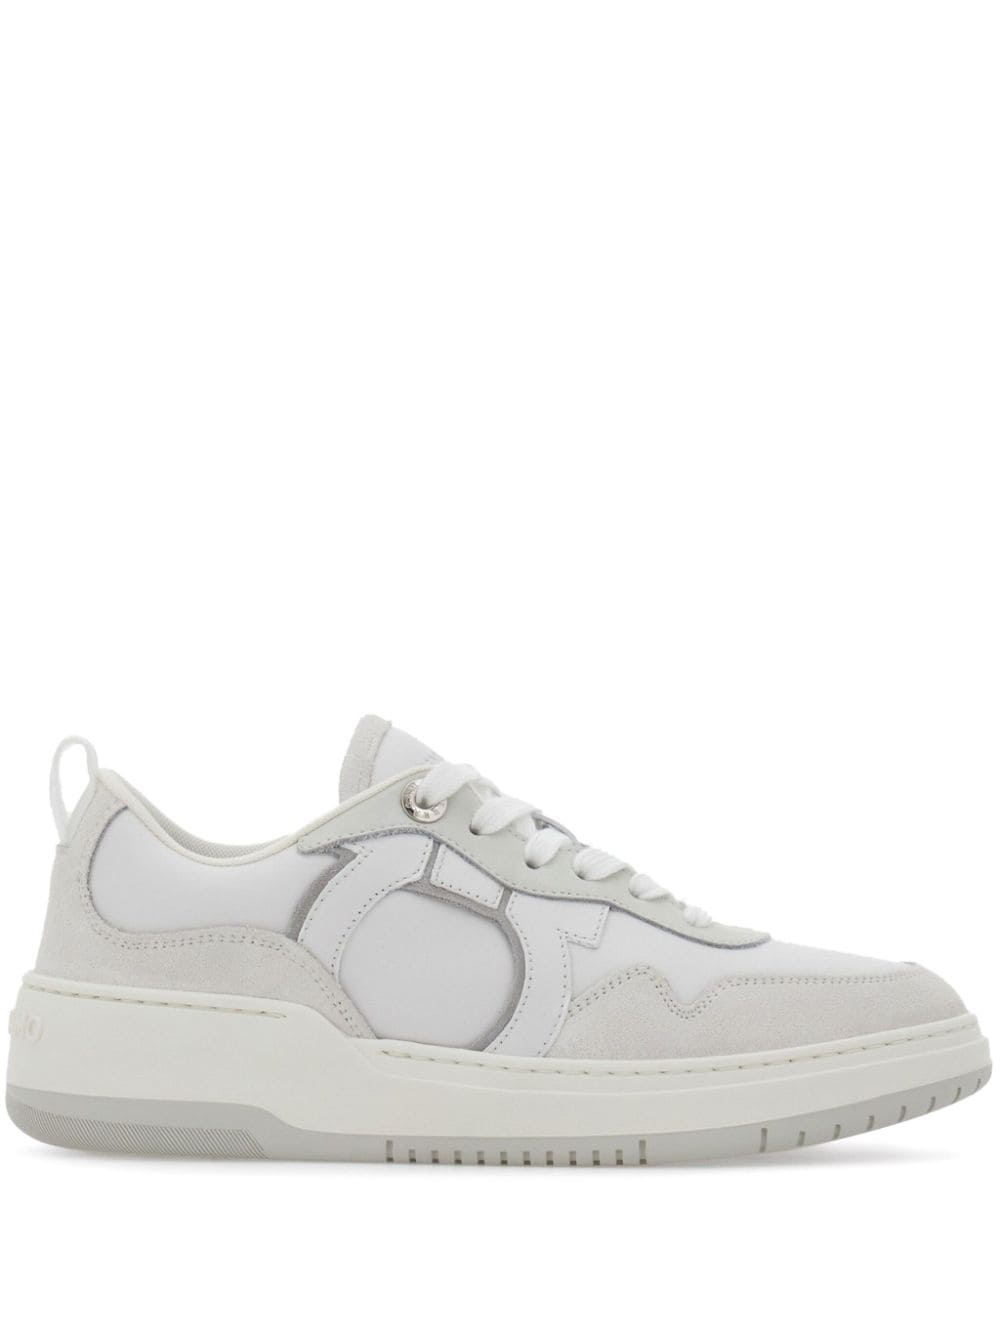 FERRAGAMO OPTICAL WHITE Gancini Hook Leather Sneakers - SS24 Collection